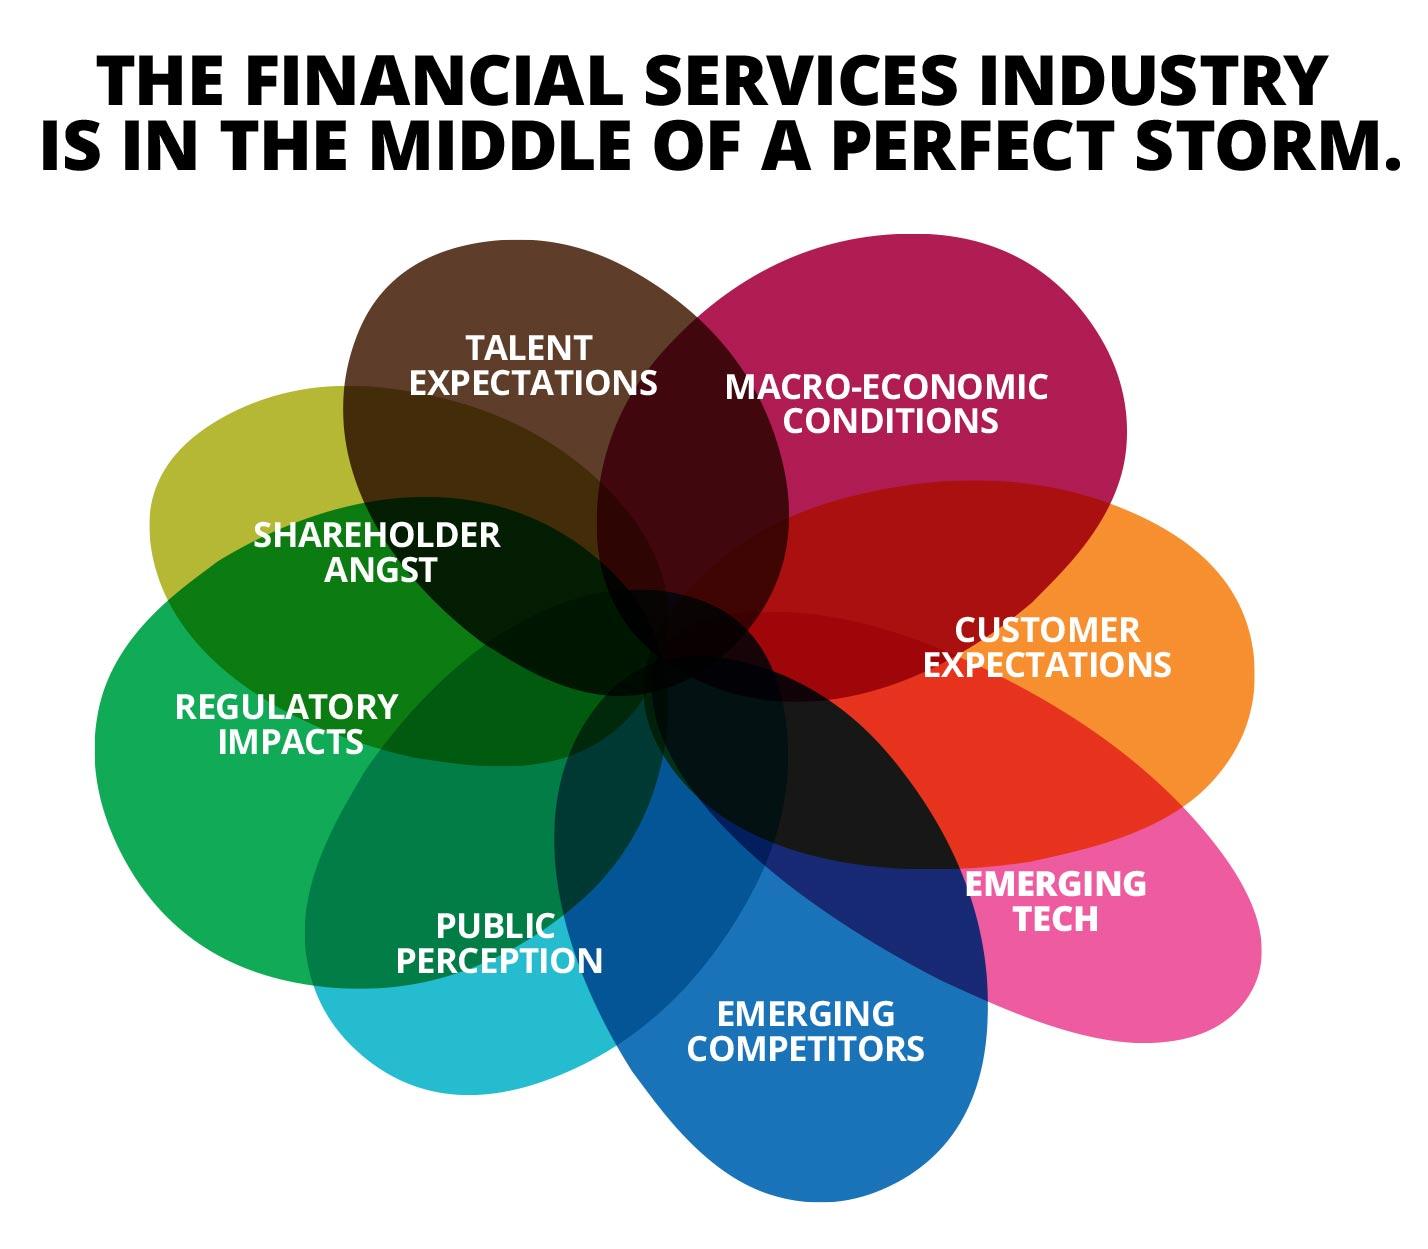 Financial Services 2025 Eight Strategic Forces that are Transforming